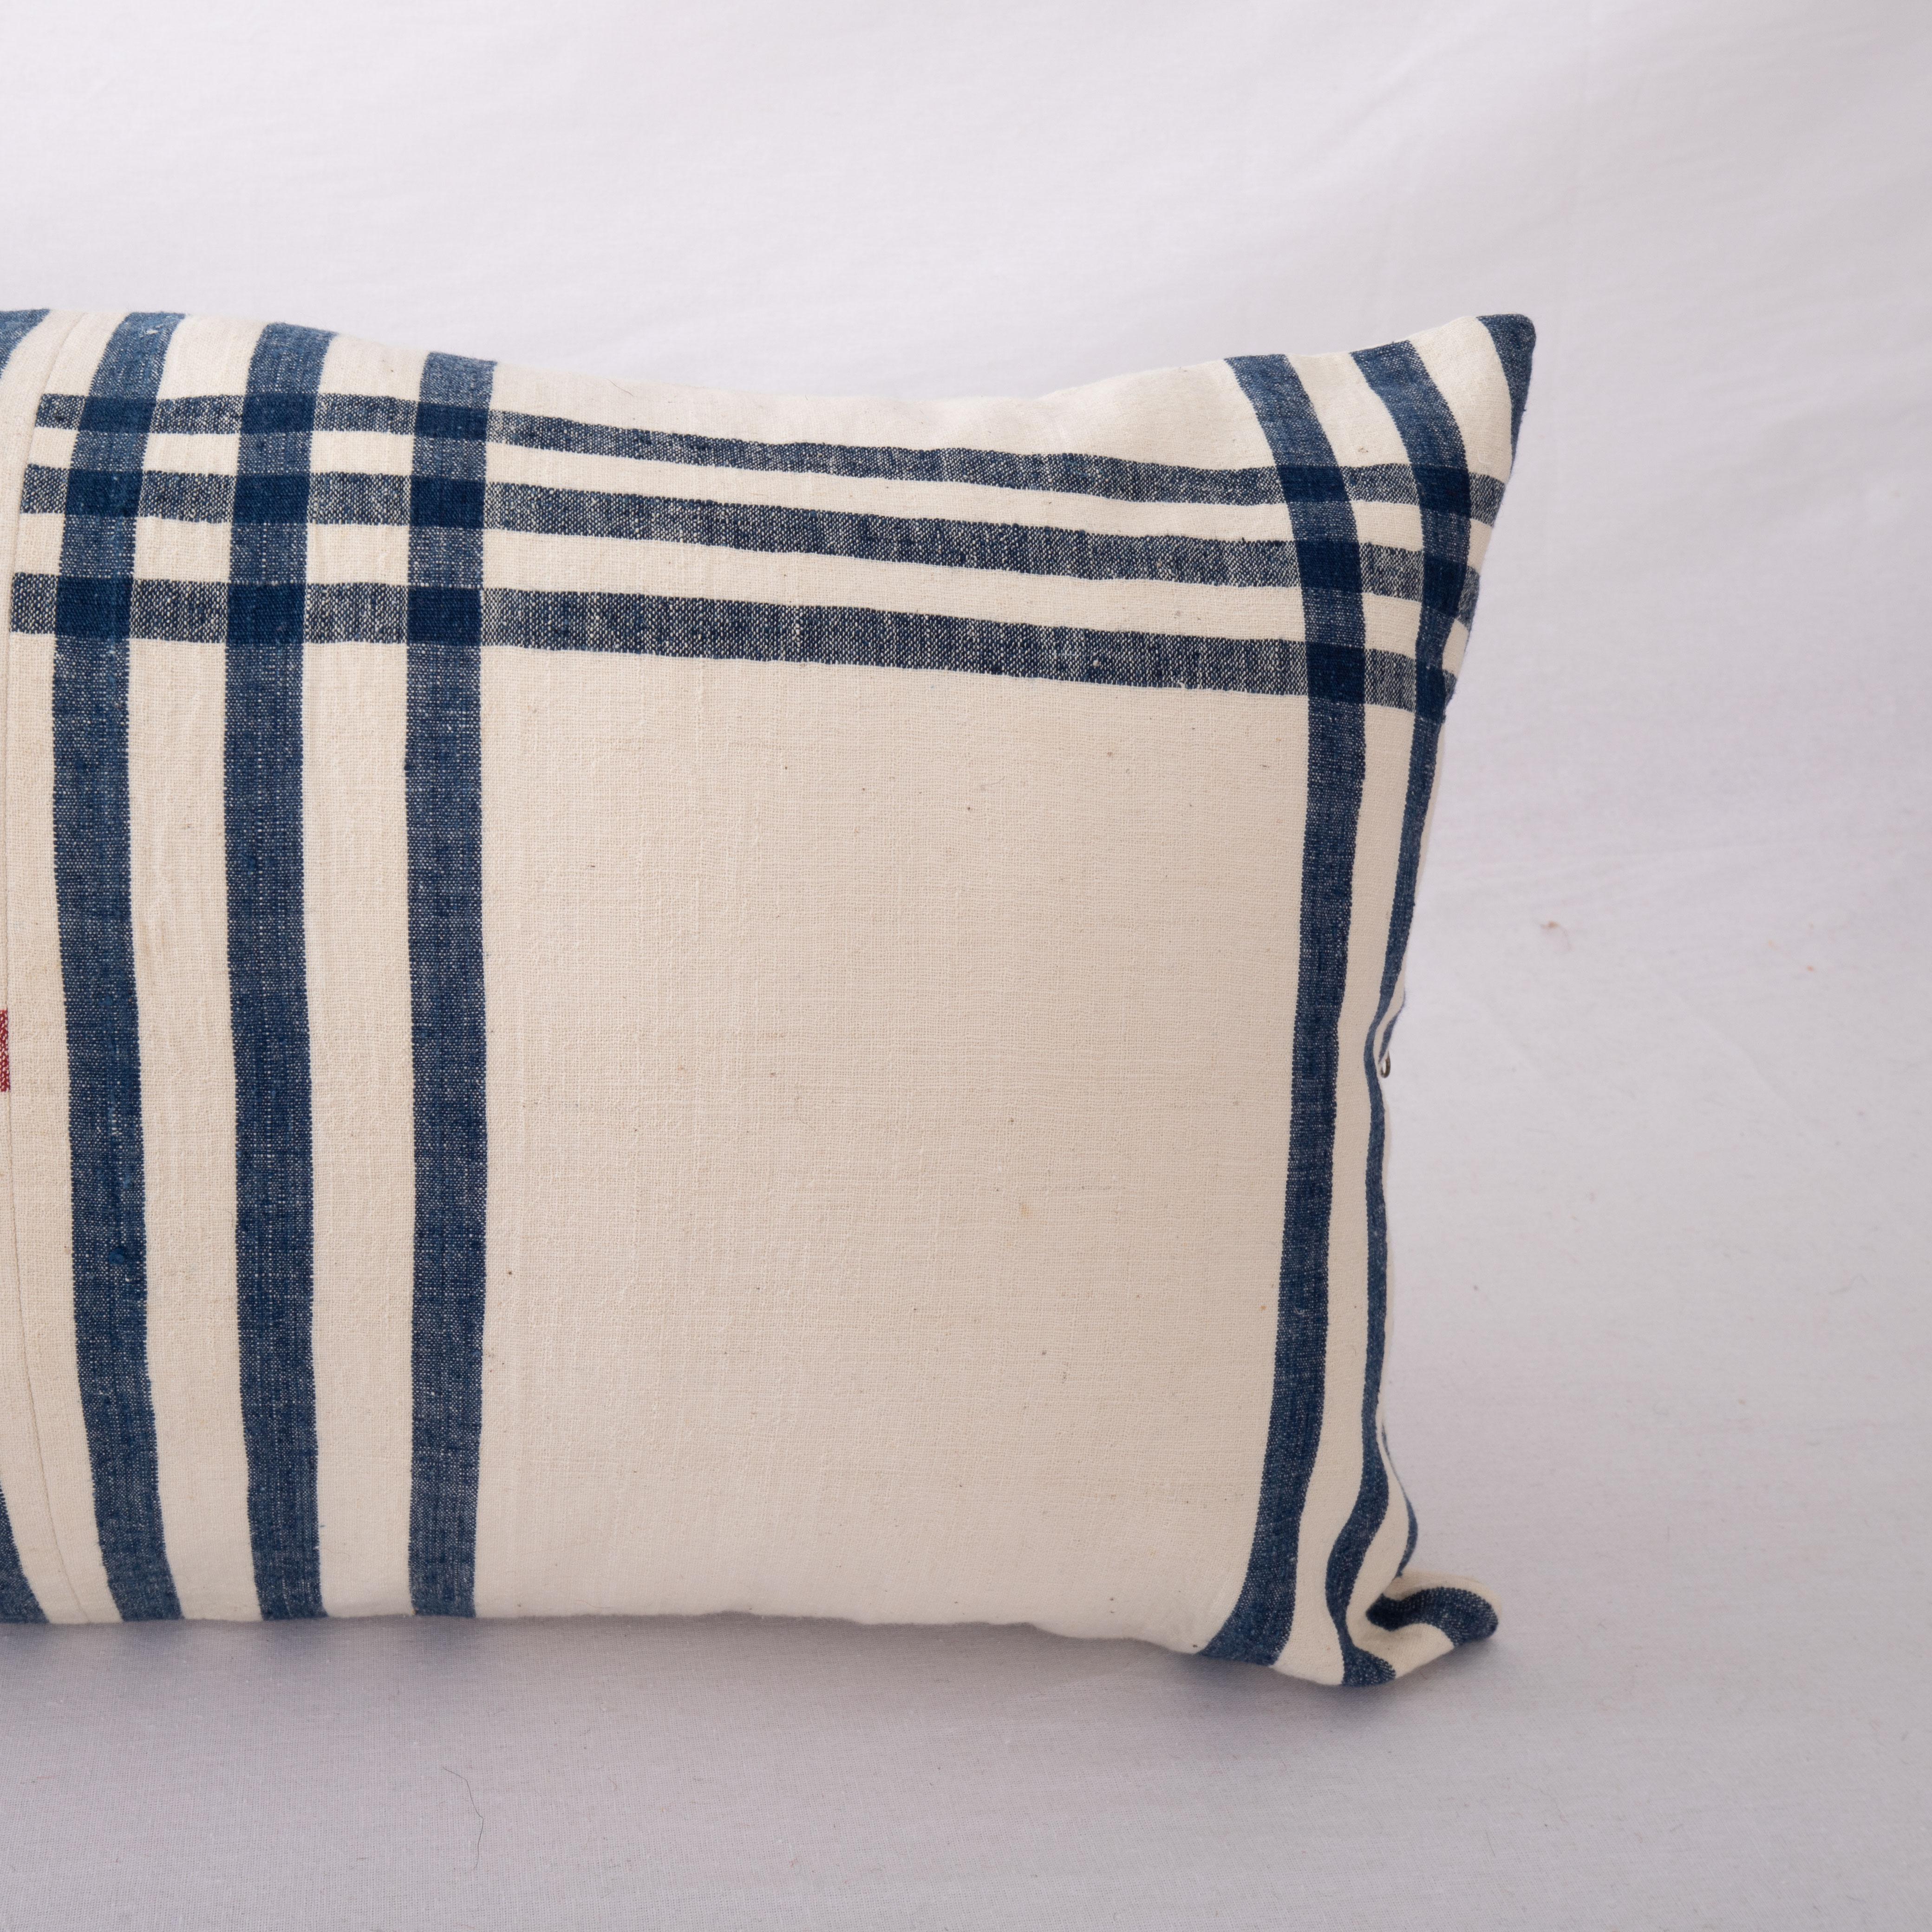 Hand-Woven Lumbar Pillow Cover Made from a Vintage Anatolian Cotton Weaving, Mid 20th C. For Sale